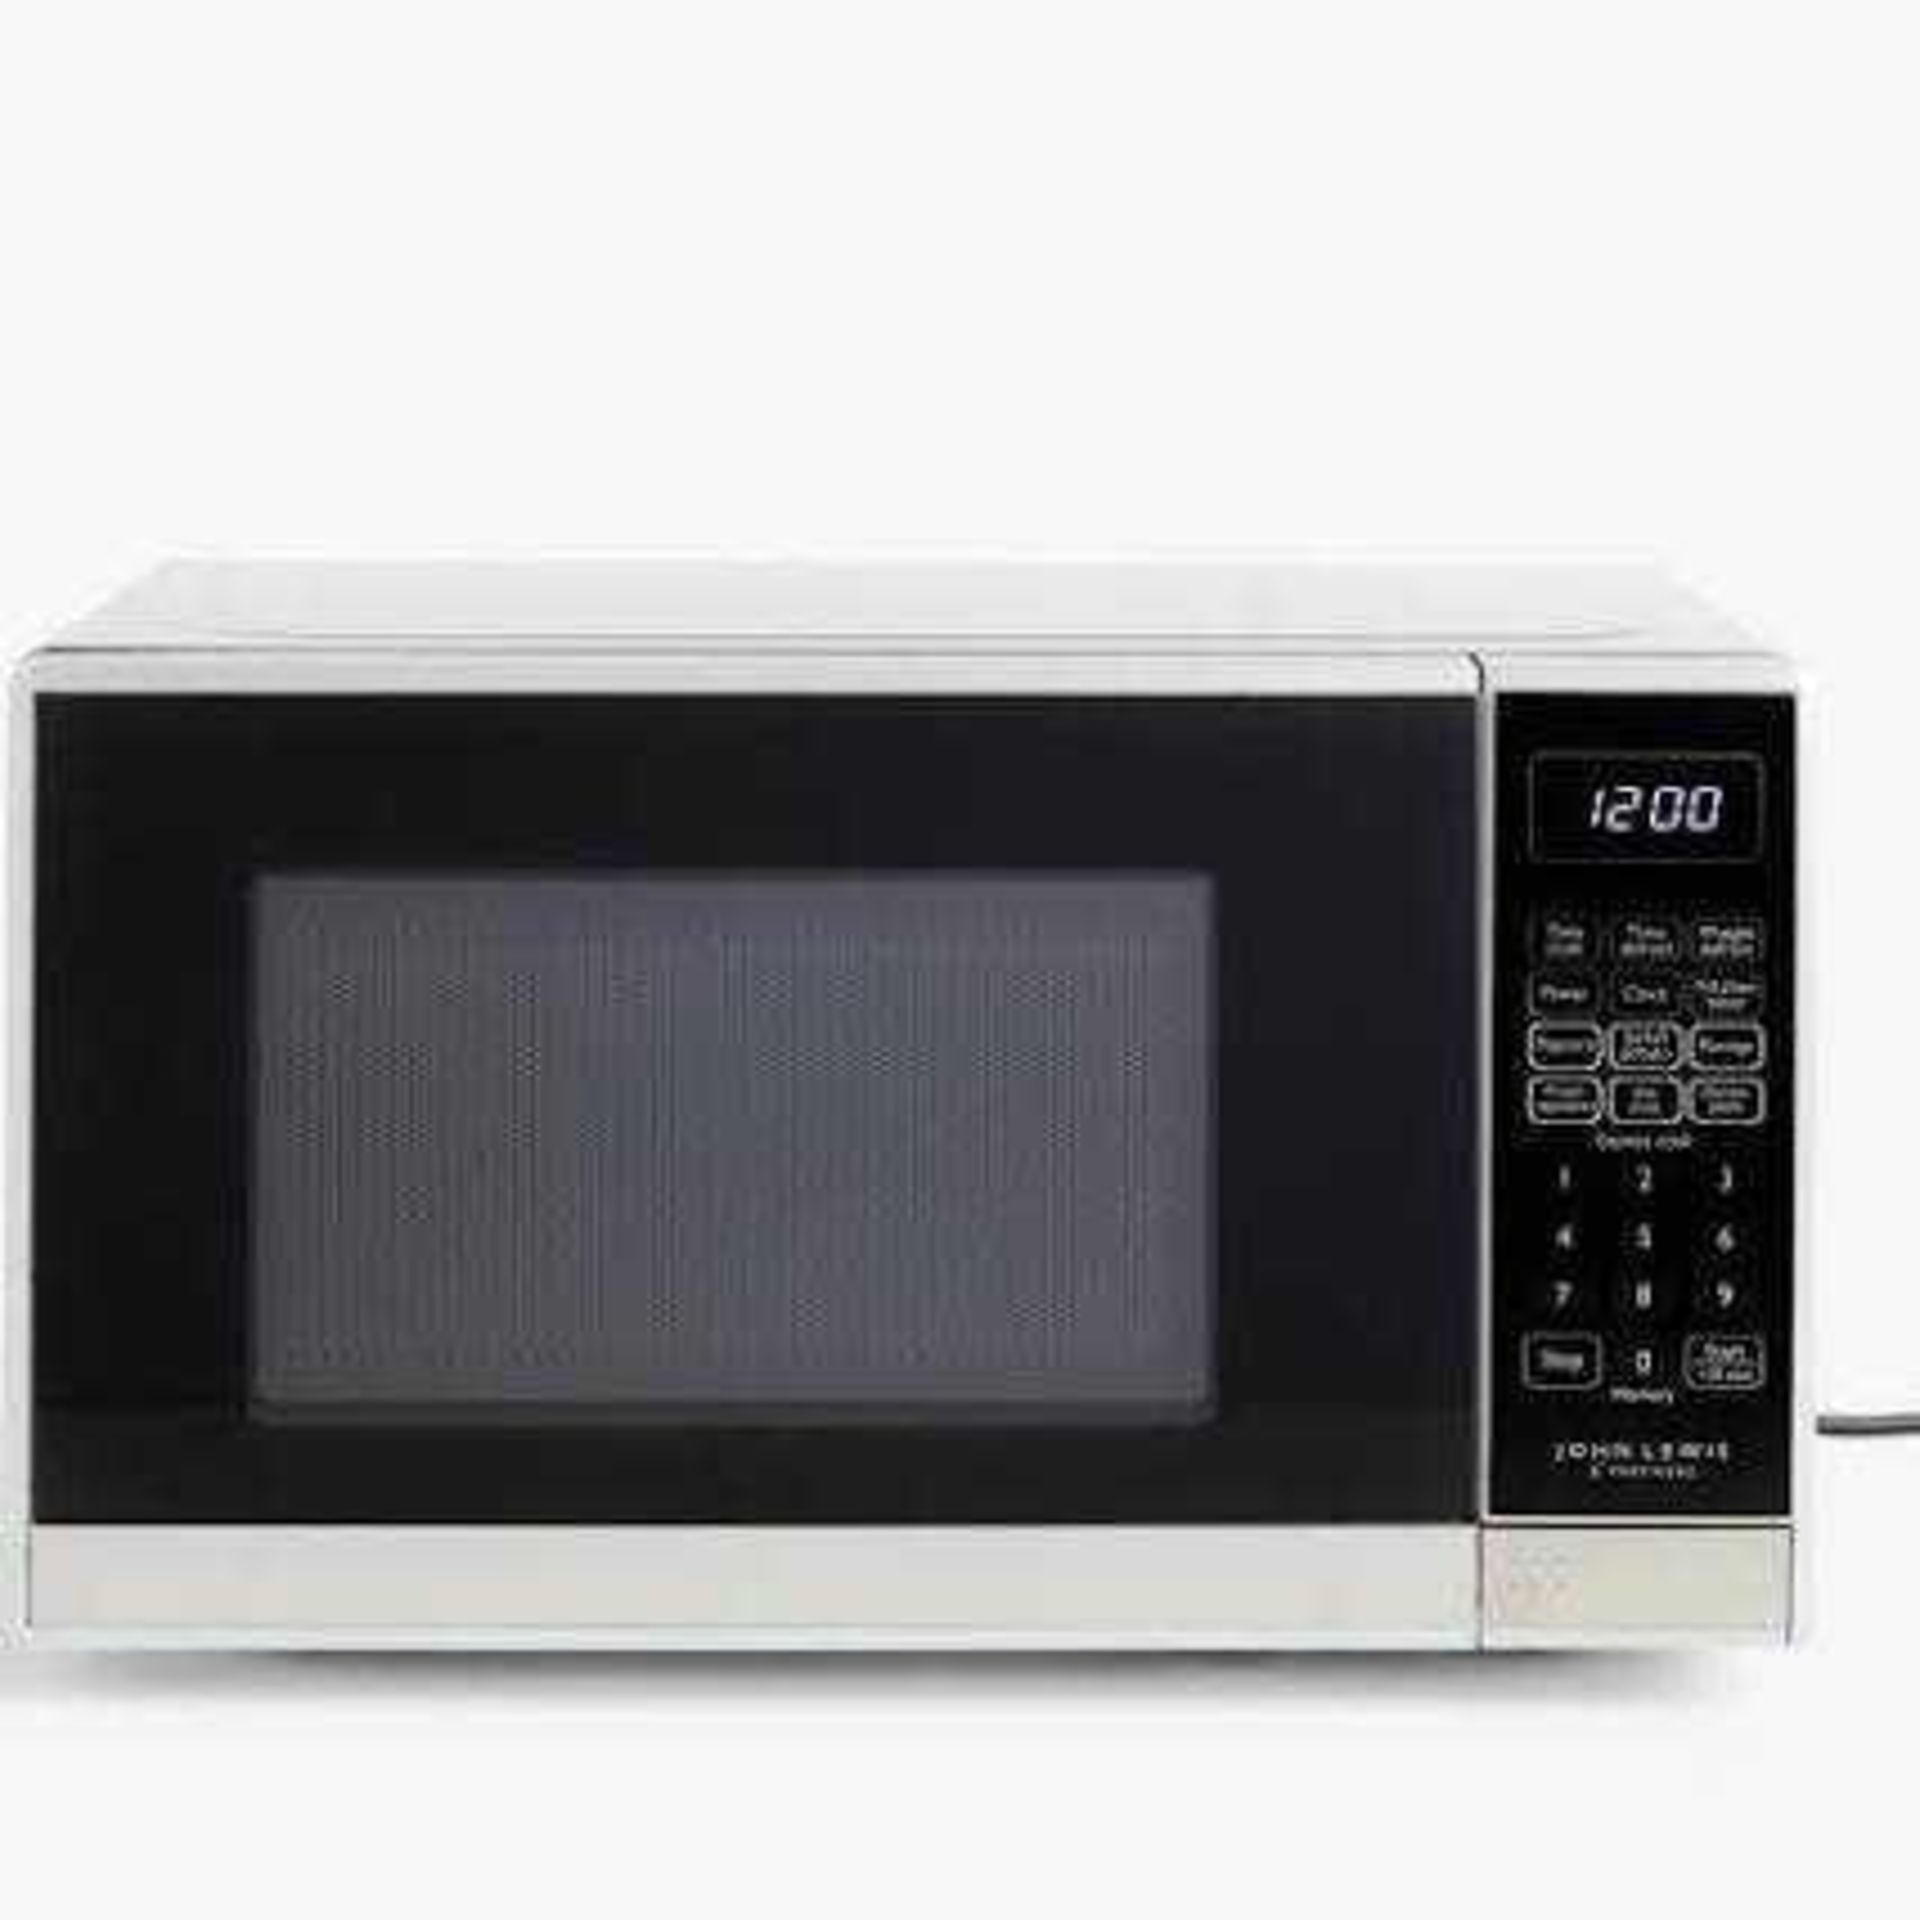 RRP £100 Boxed John Lewis Stainless Steel Microwave Oven